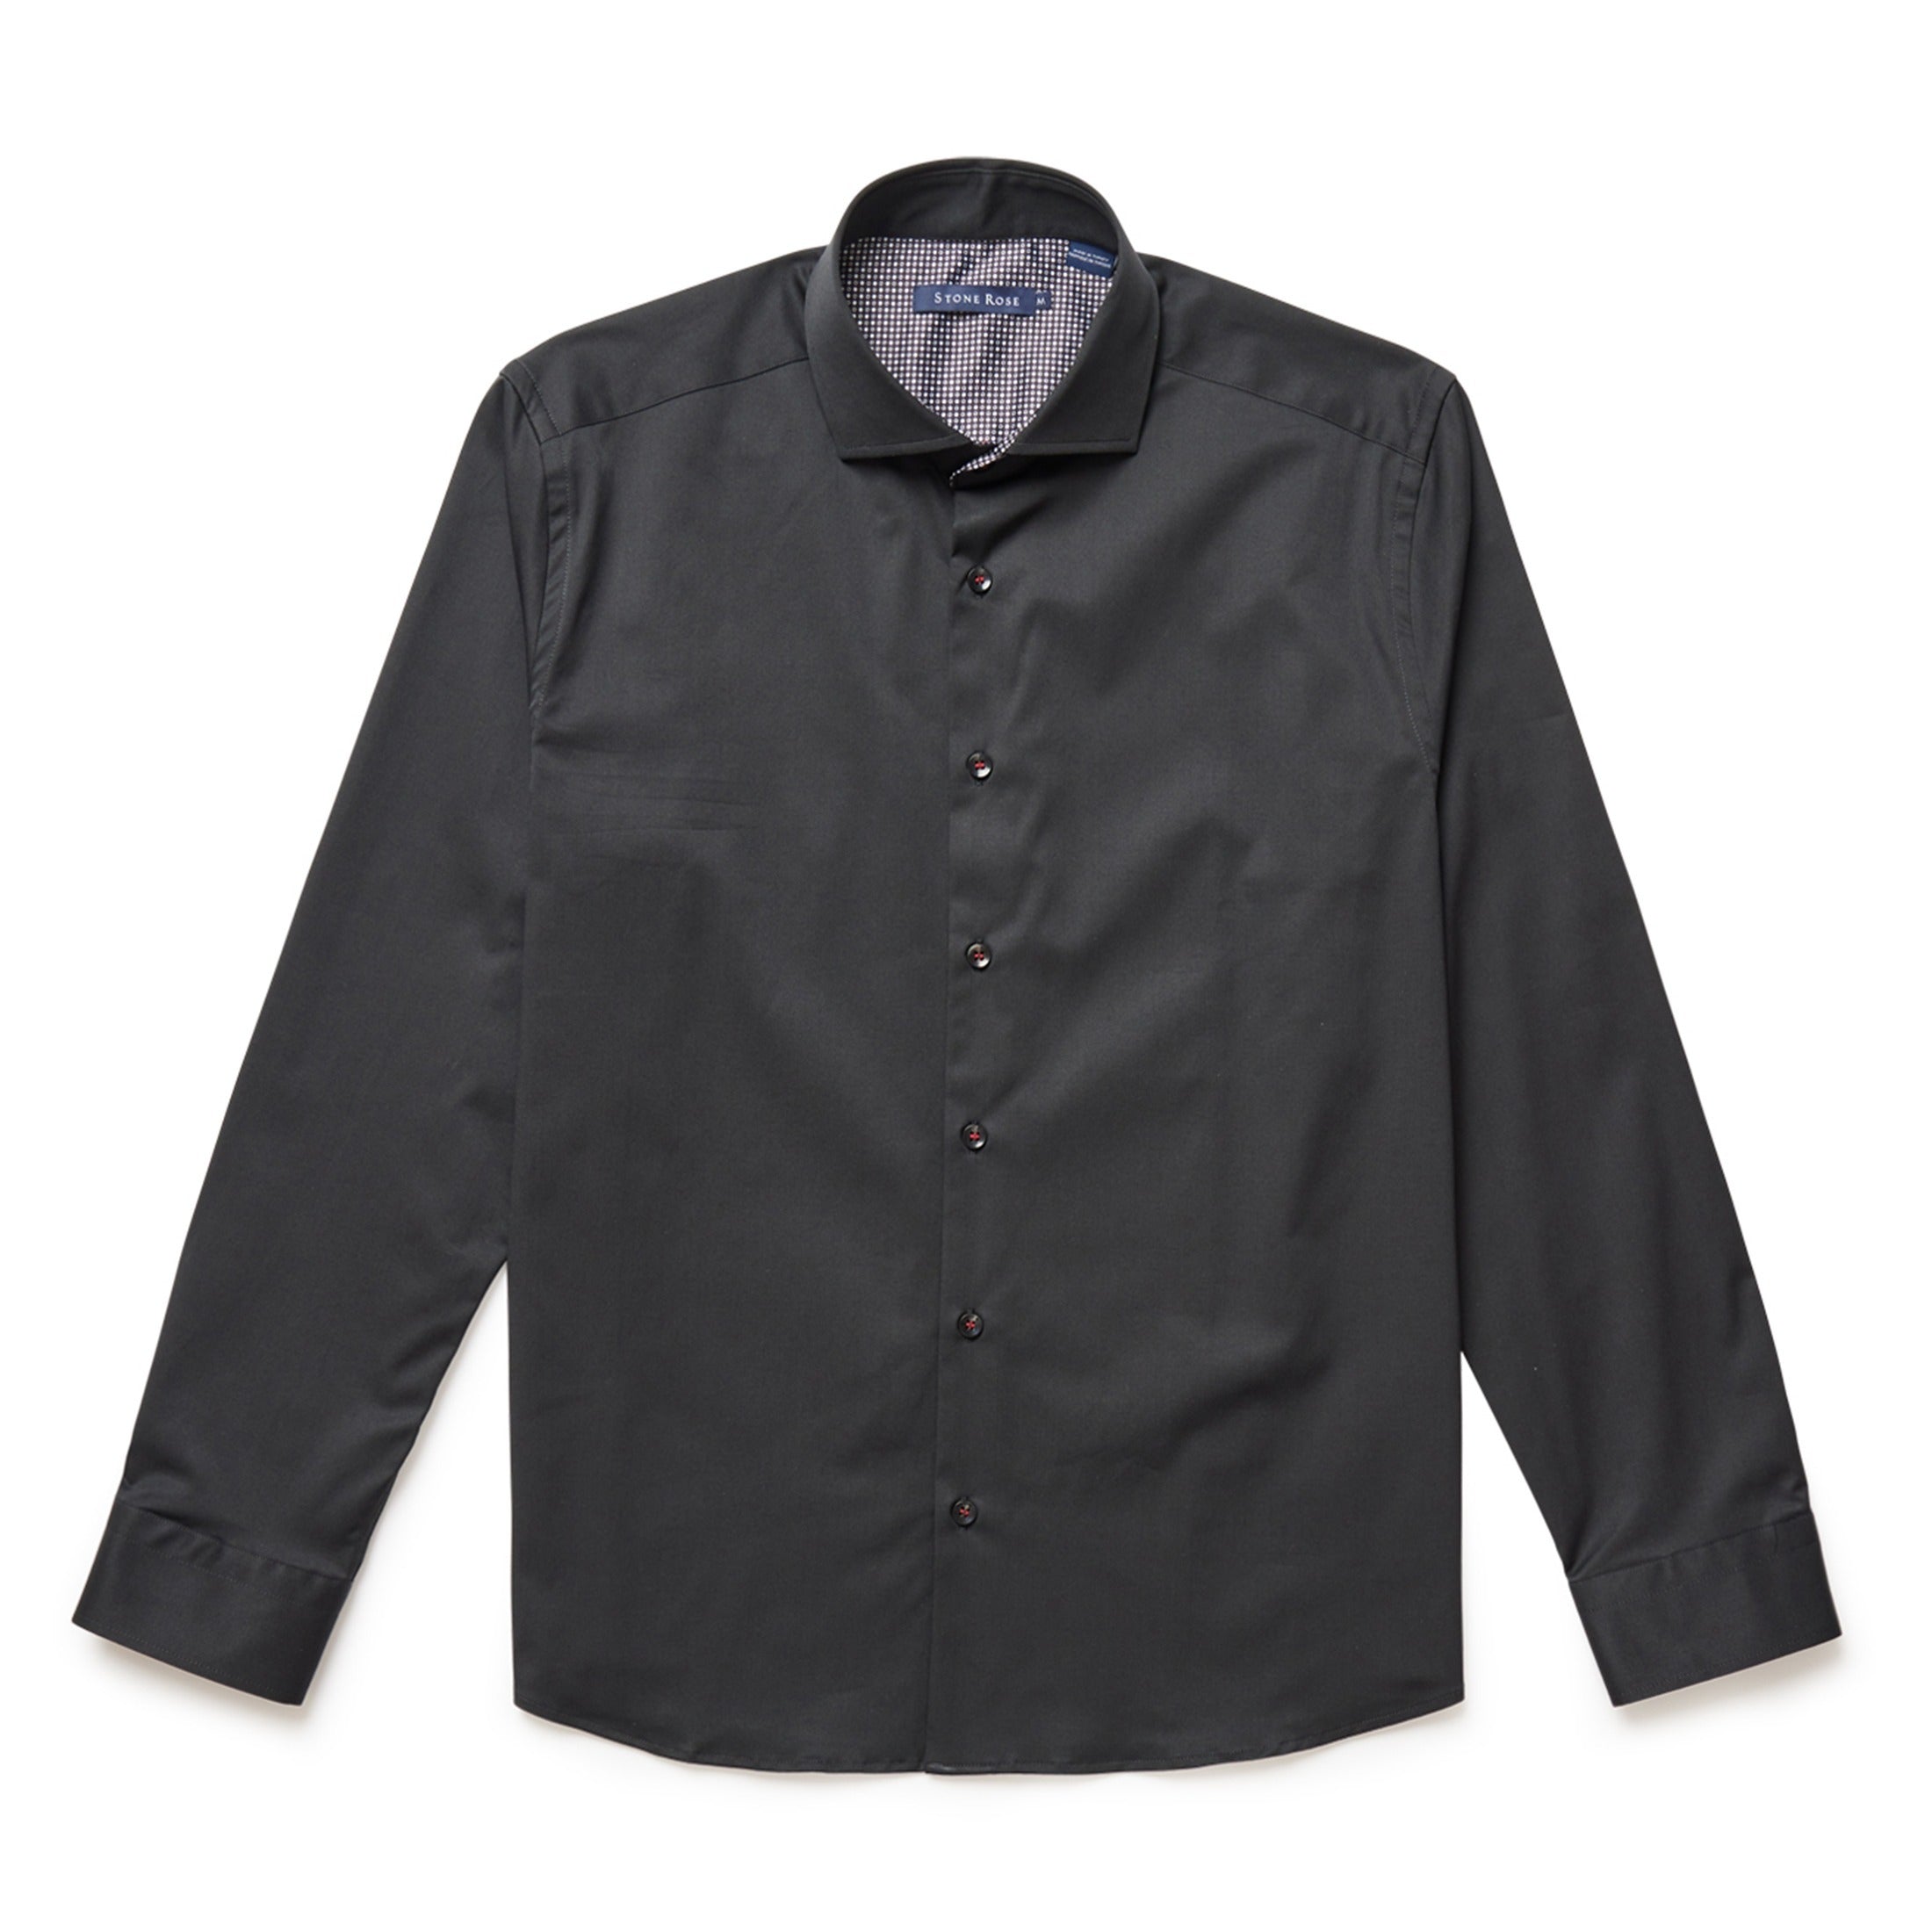 Black Solid Woven Drytouch Shirt